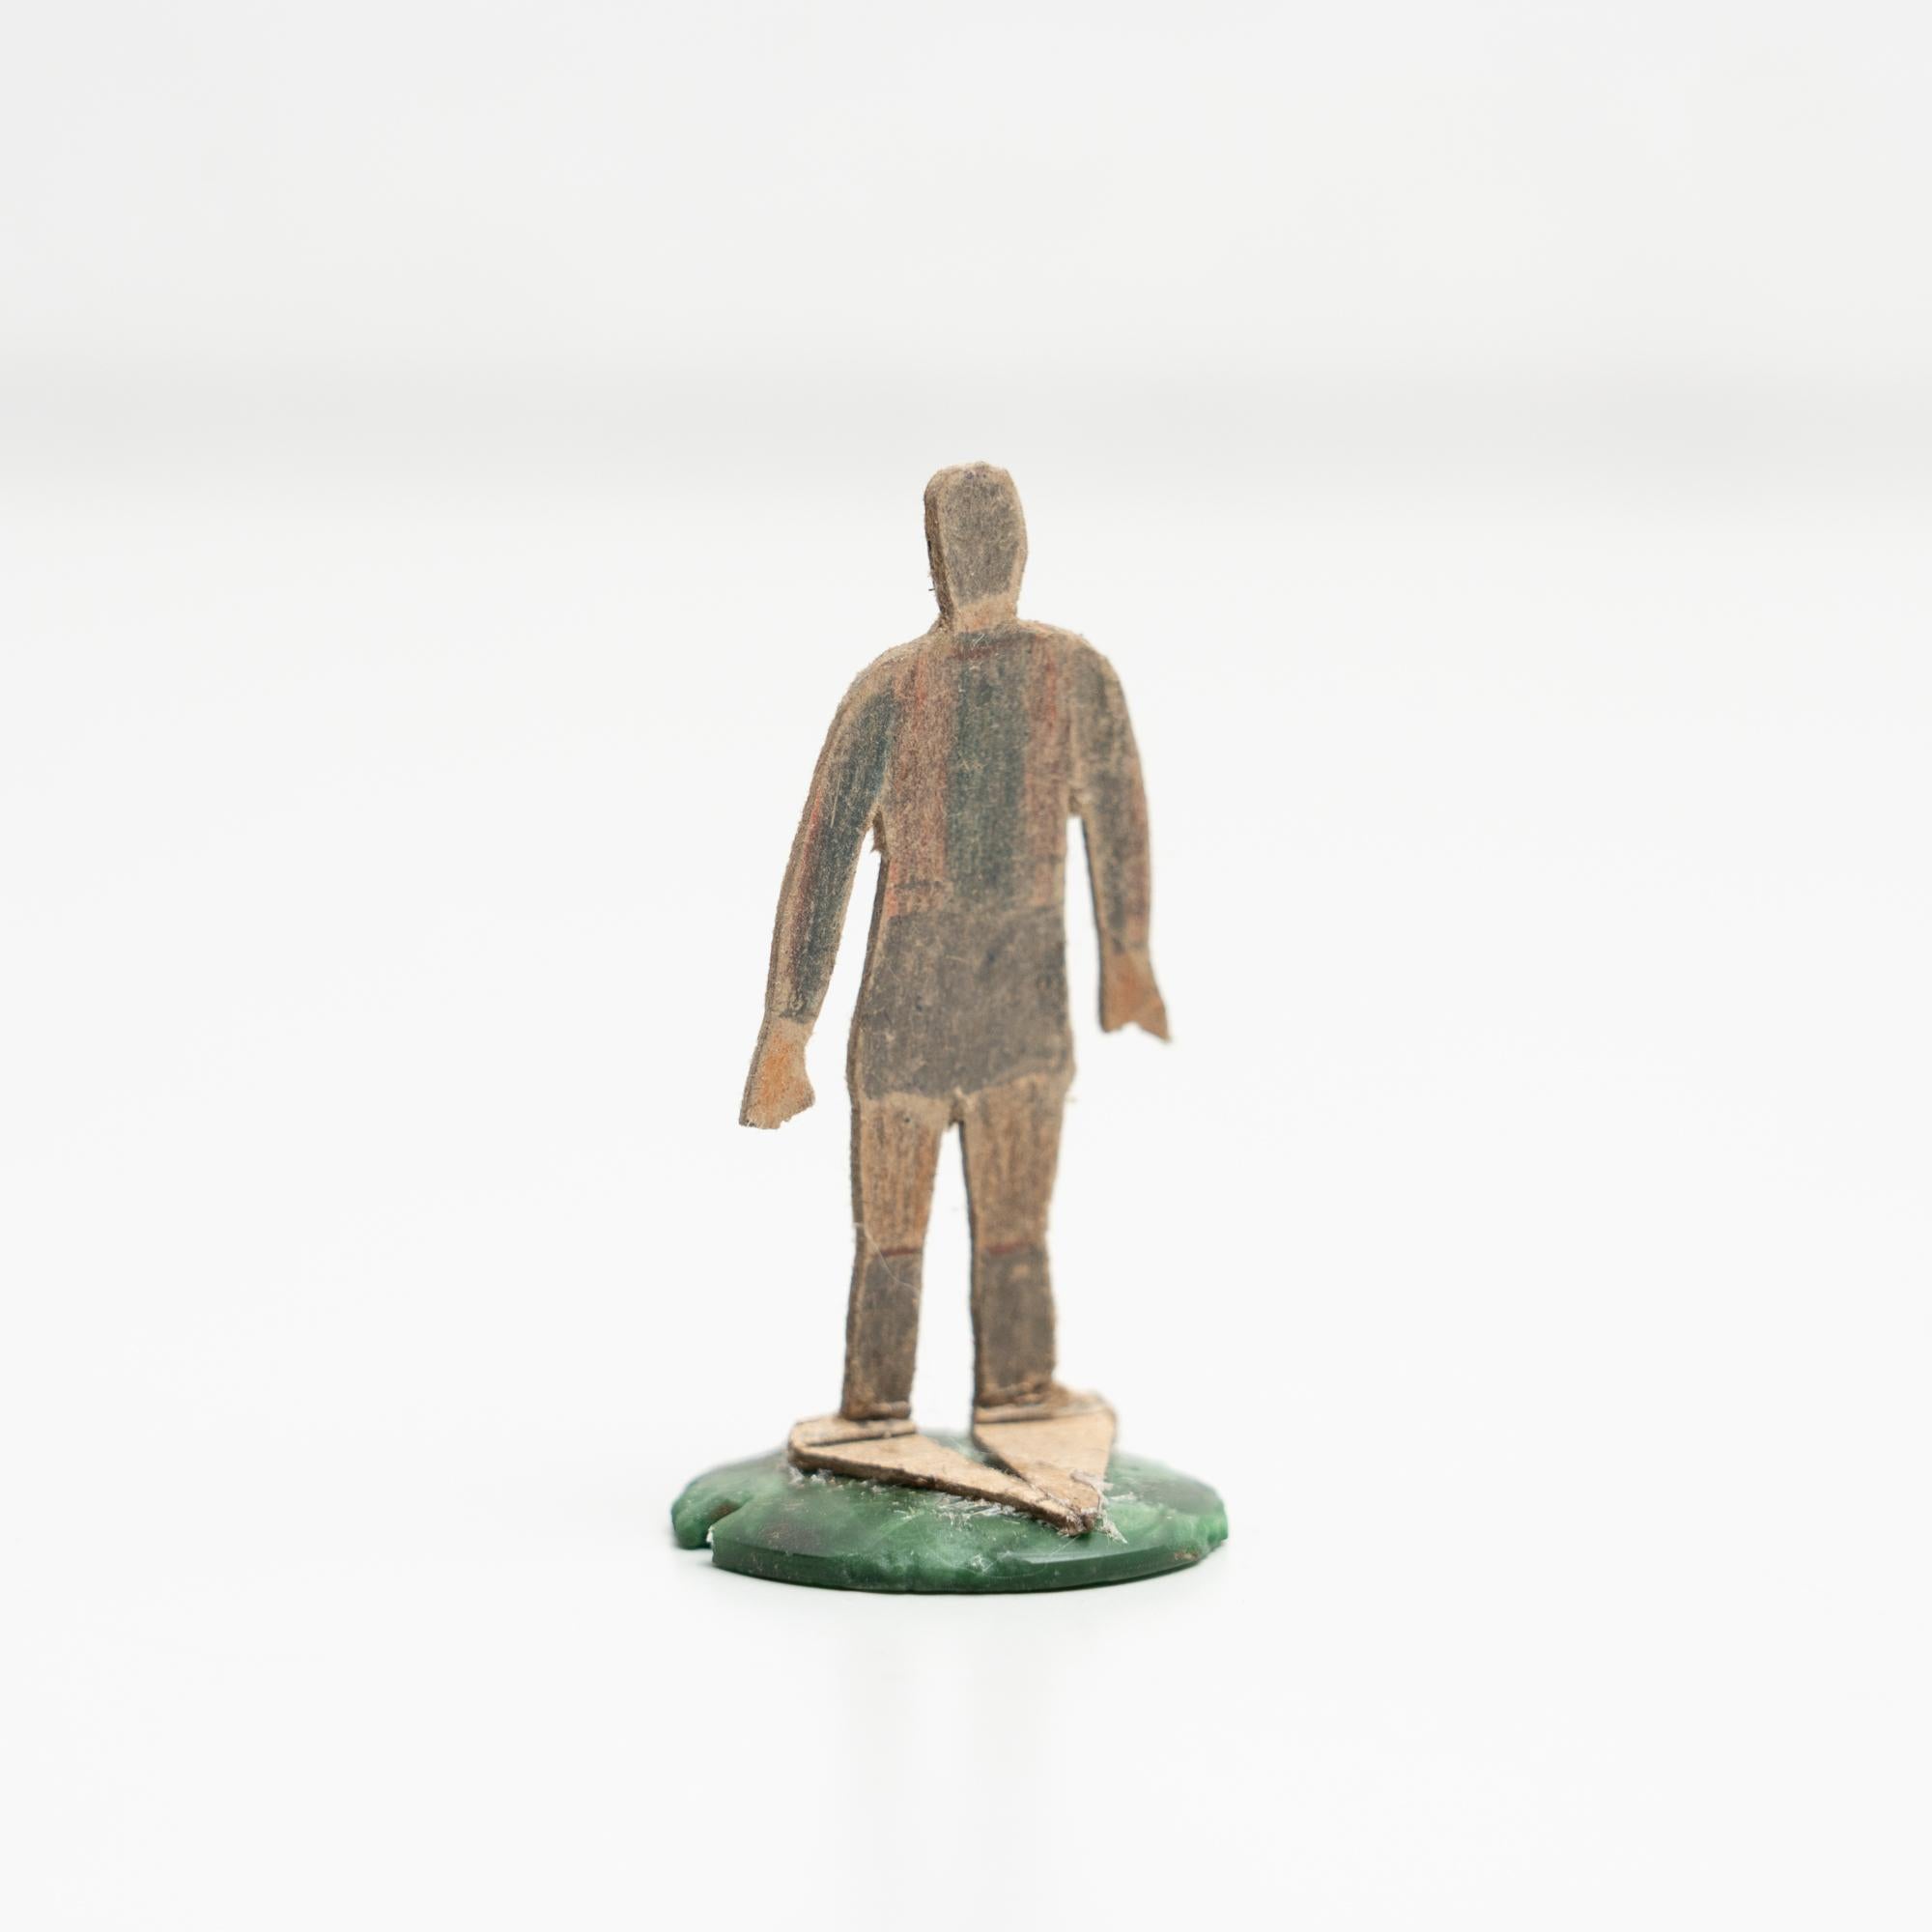 Traditional Antique Button Soccer Game Figure, circa 1950 For Sale 1